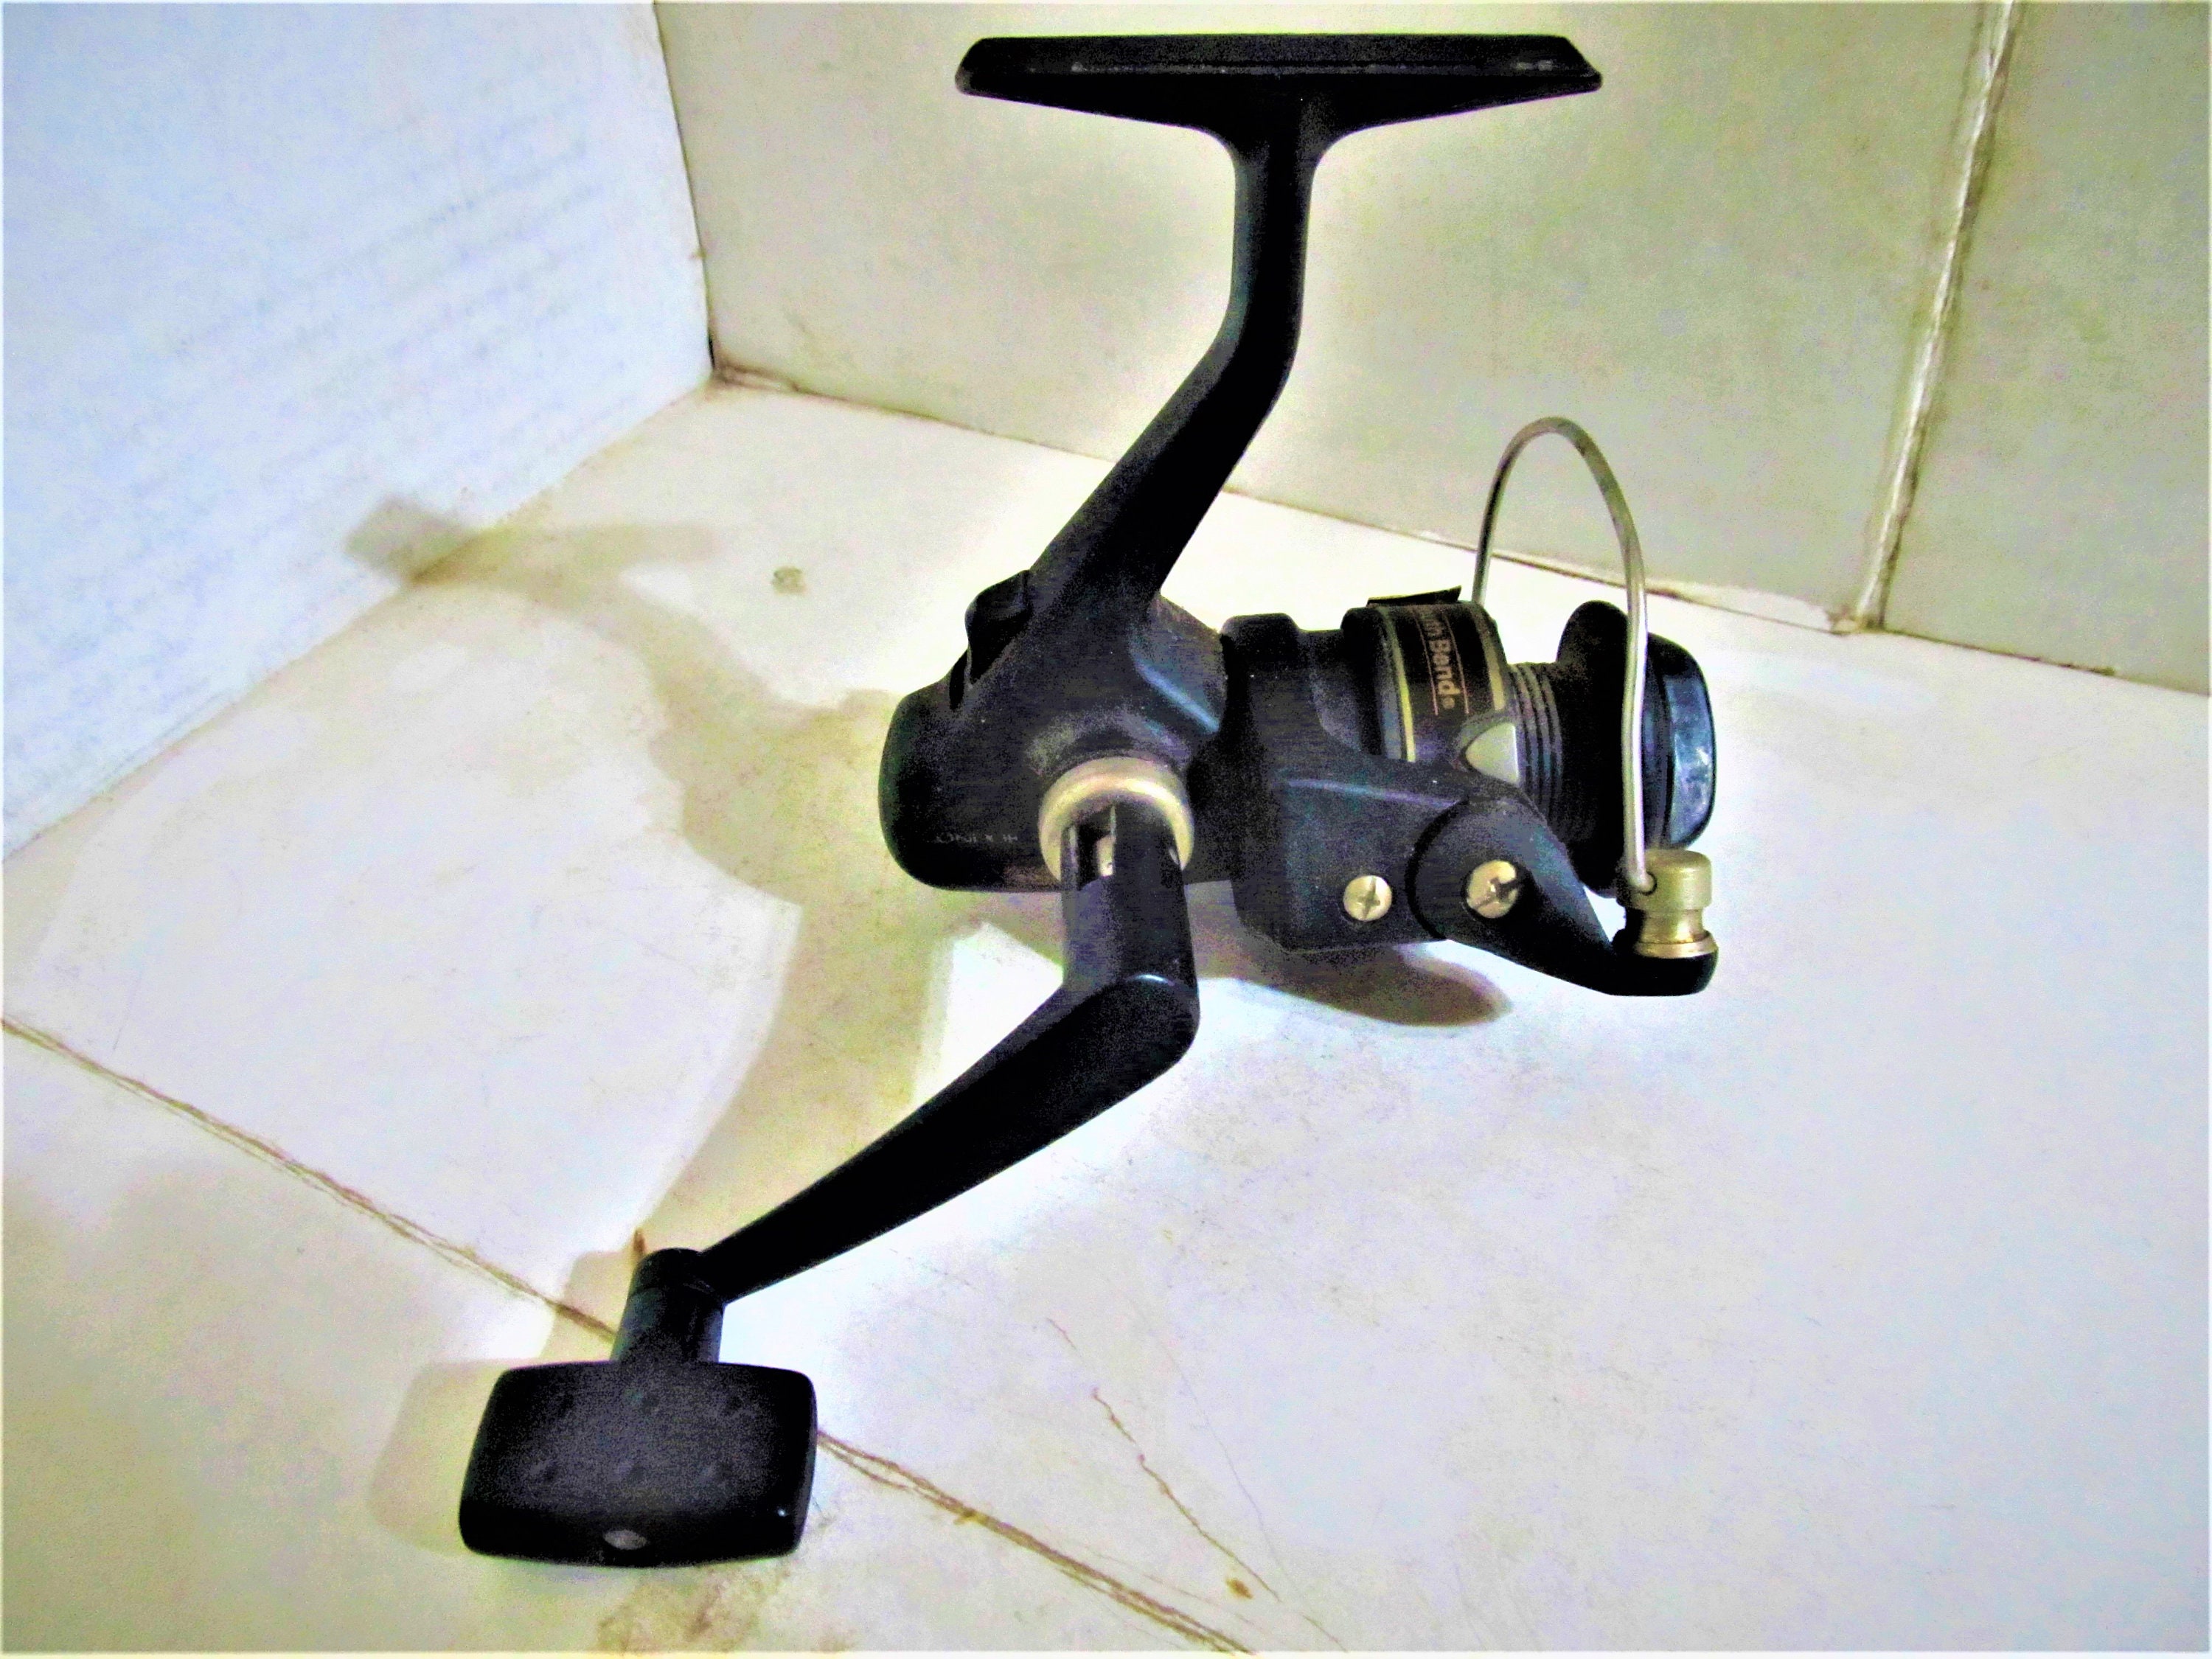 South Bend Condor 510a Ultra Lite Spinning Reel 